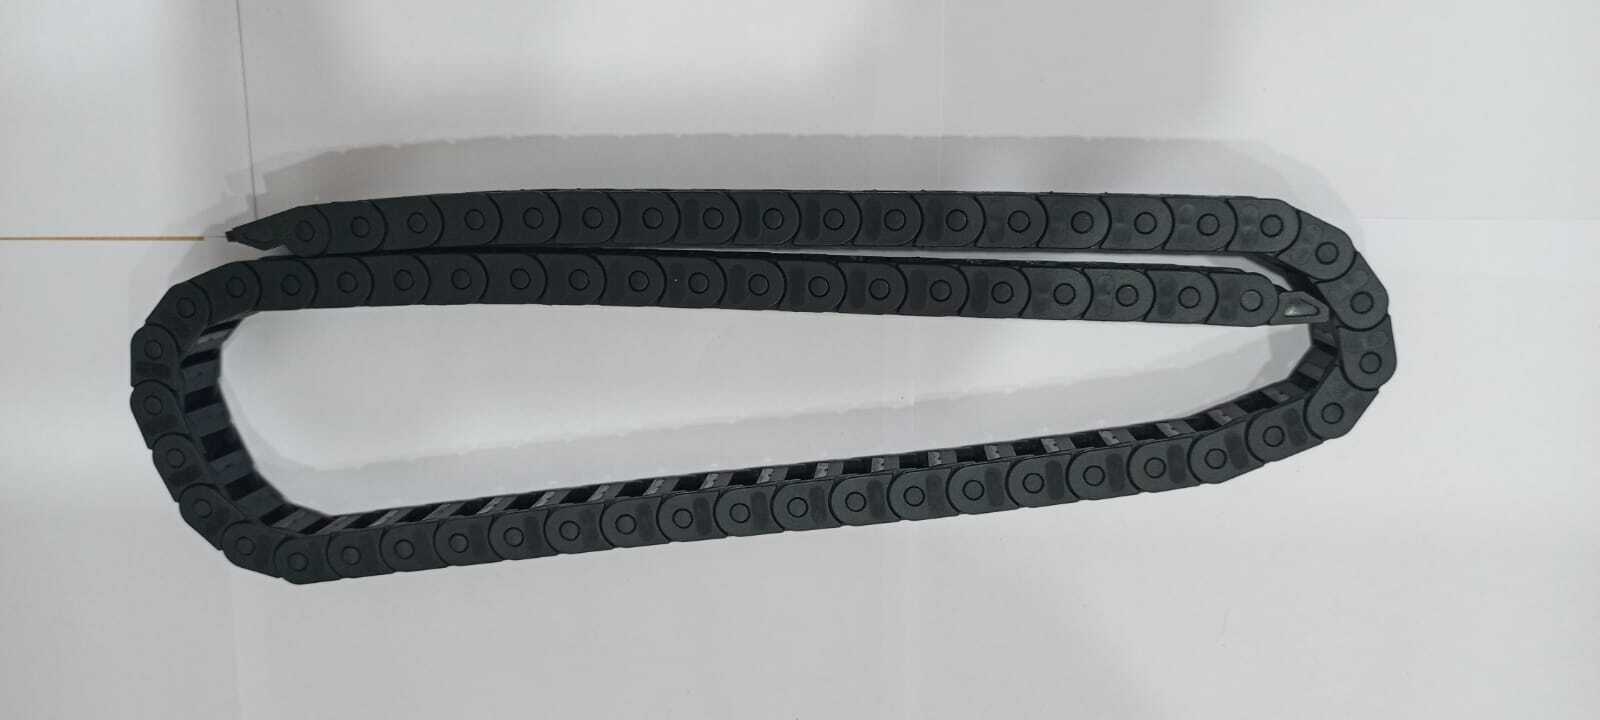 Cable drag chain 10x15xR15 OP